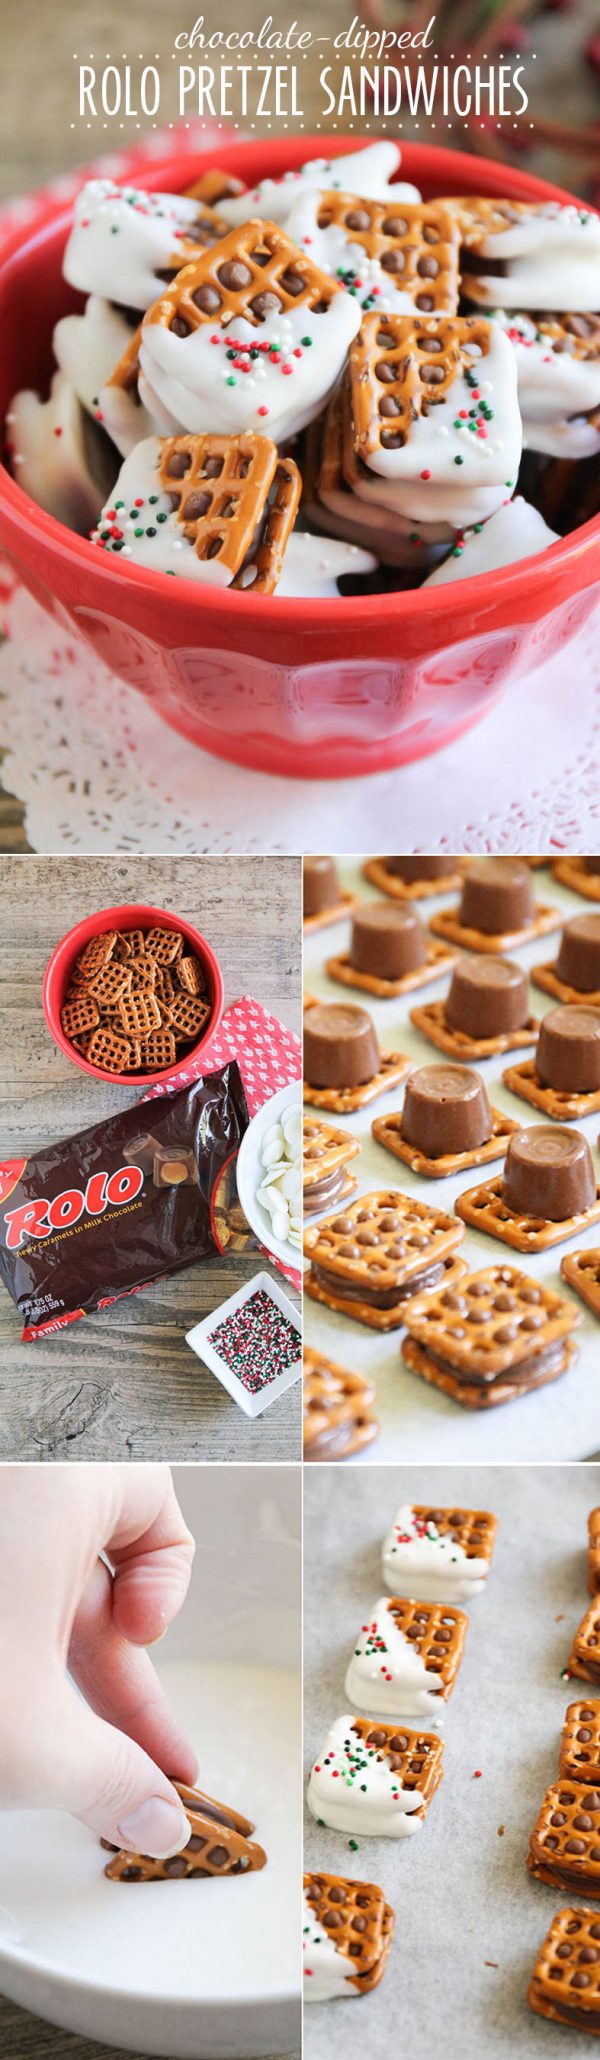 Rolo Pretzel Sandwiches- an easy and fun Christmas treat! But be careful- they disappear quickly!